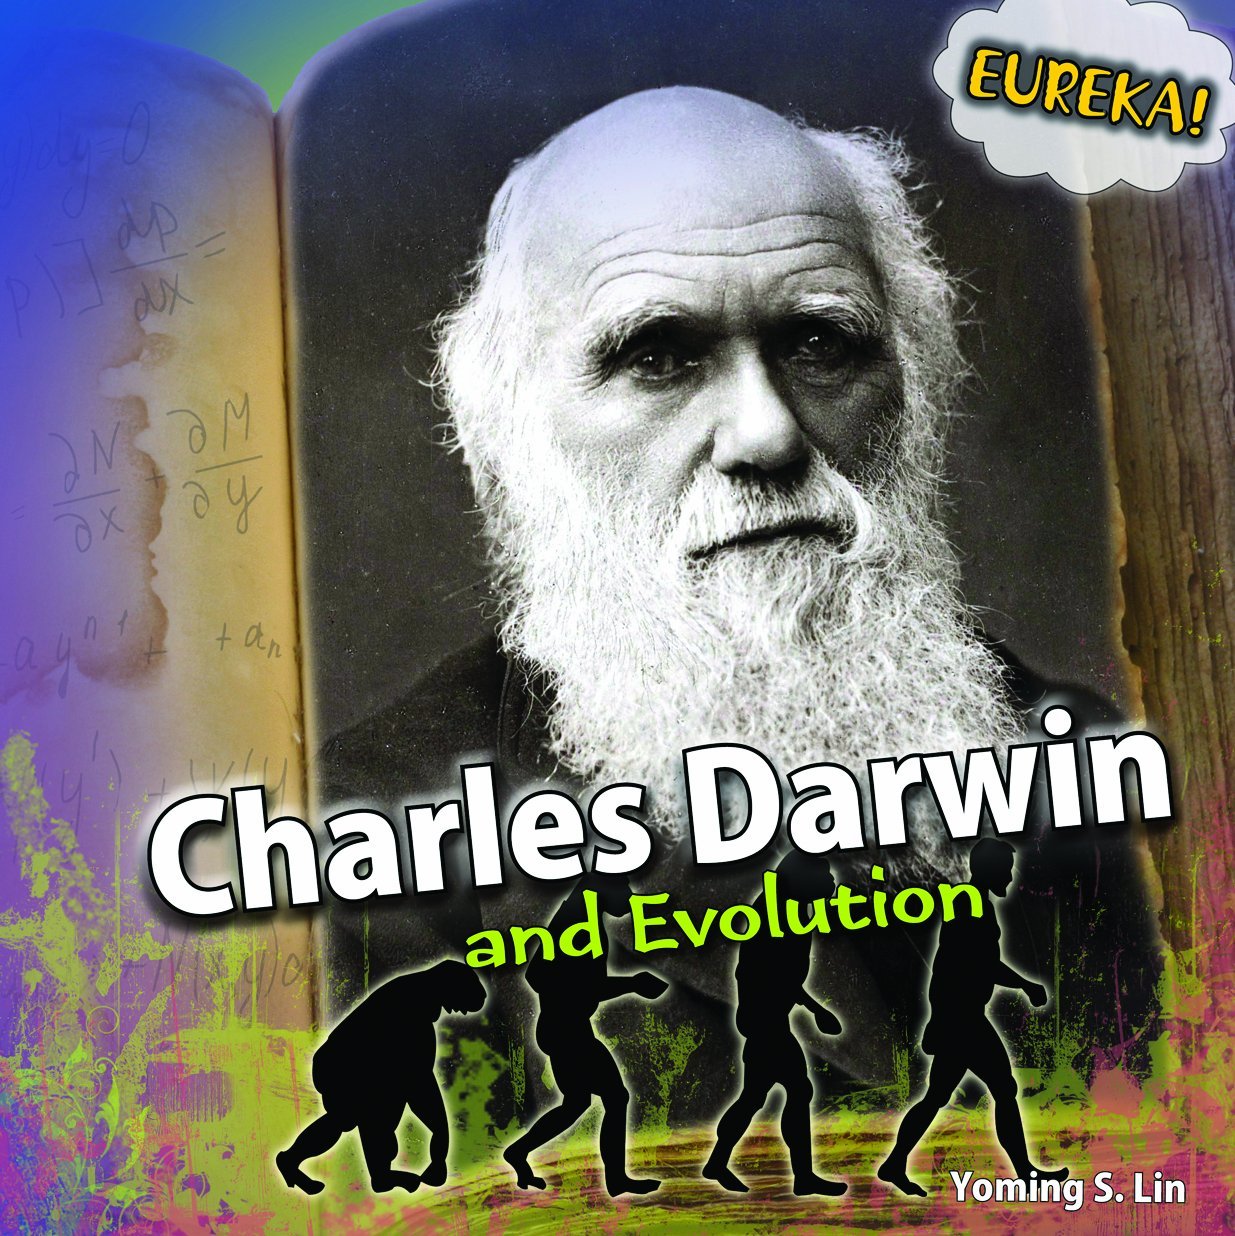 Charles Darwin and Evolution Fahrenheit, Celsius, and Their Temperature Scales Galileo and the Telescope Isaac Newton and Gravity